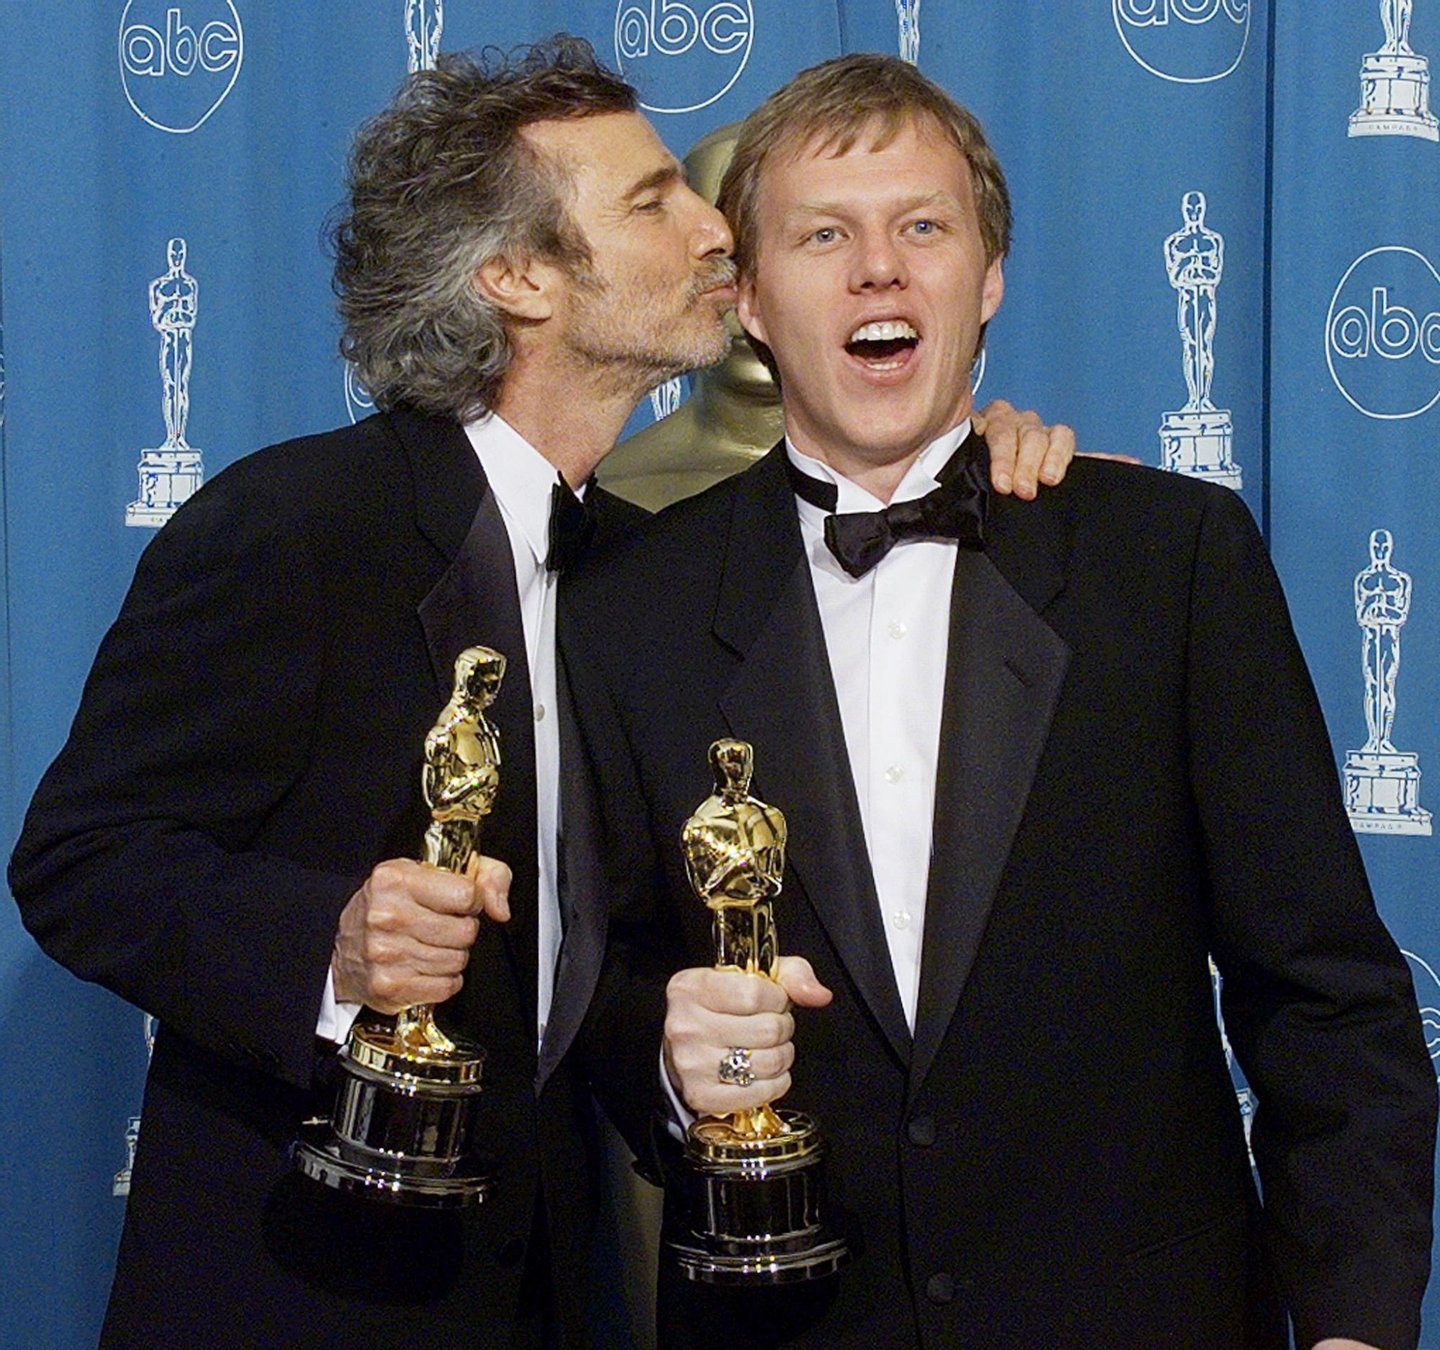 LOS ANGELES, UNITED STATES: Oscar winners for Best Adapted Screenplay Curtis Hanson (L) and Brian Helgelow, pose for photographers 23 March at the 70th Annual Academy Awards at the Shrine Auditorium in Los Angeles. (ELECTRONIC IMAGE) AFP PHOTO/Hector MATA (Photo credit should read HECTOR MATA/AFP/Getty Images)